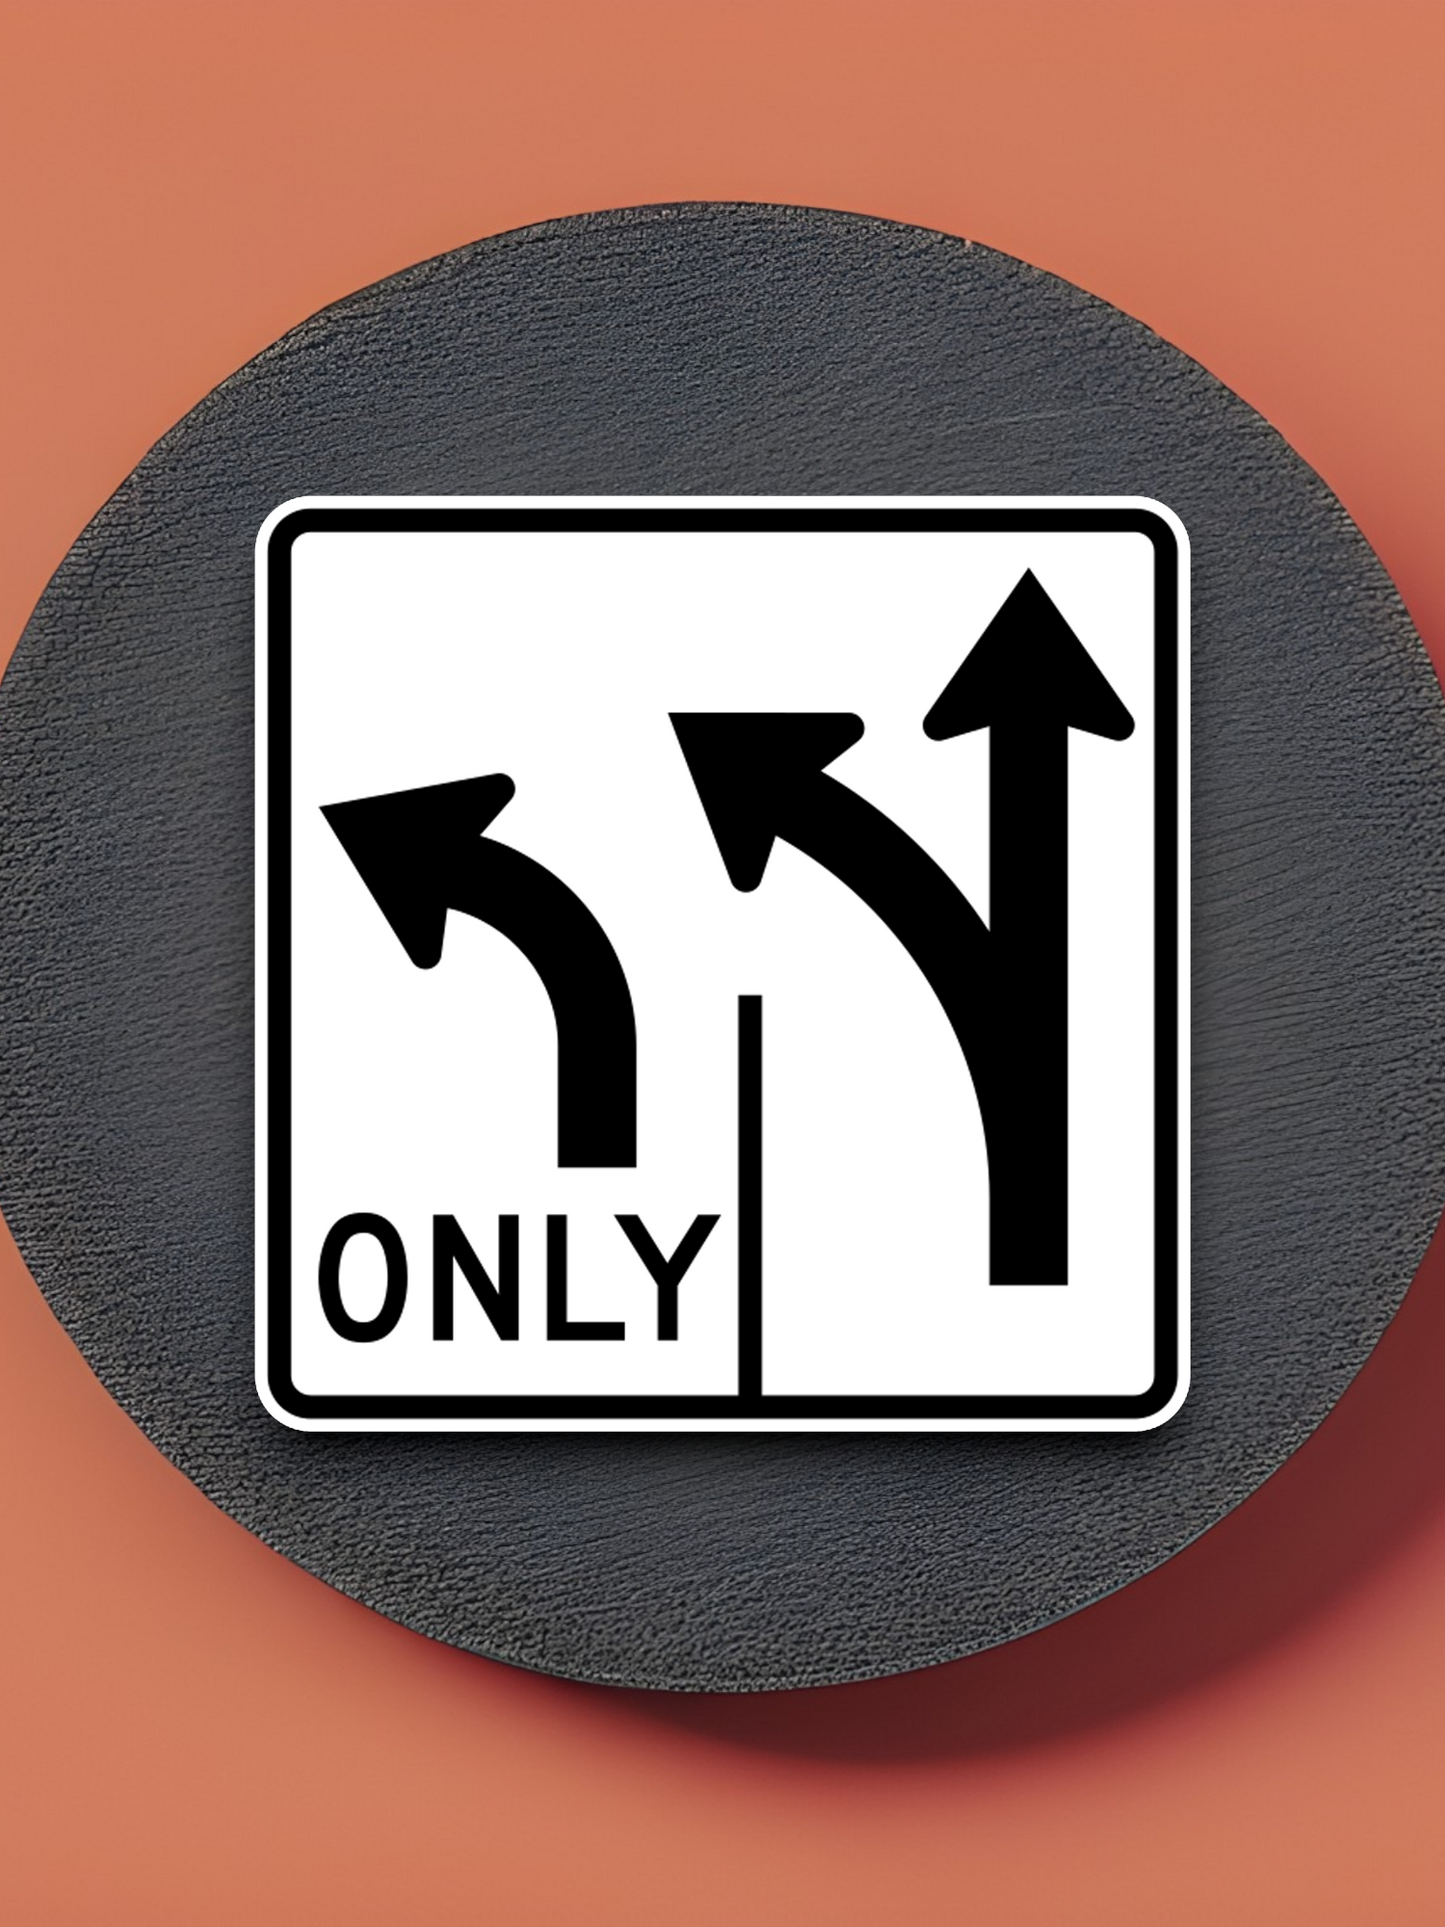 Advanced intersection control United States Road Sign Sticker